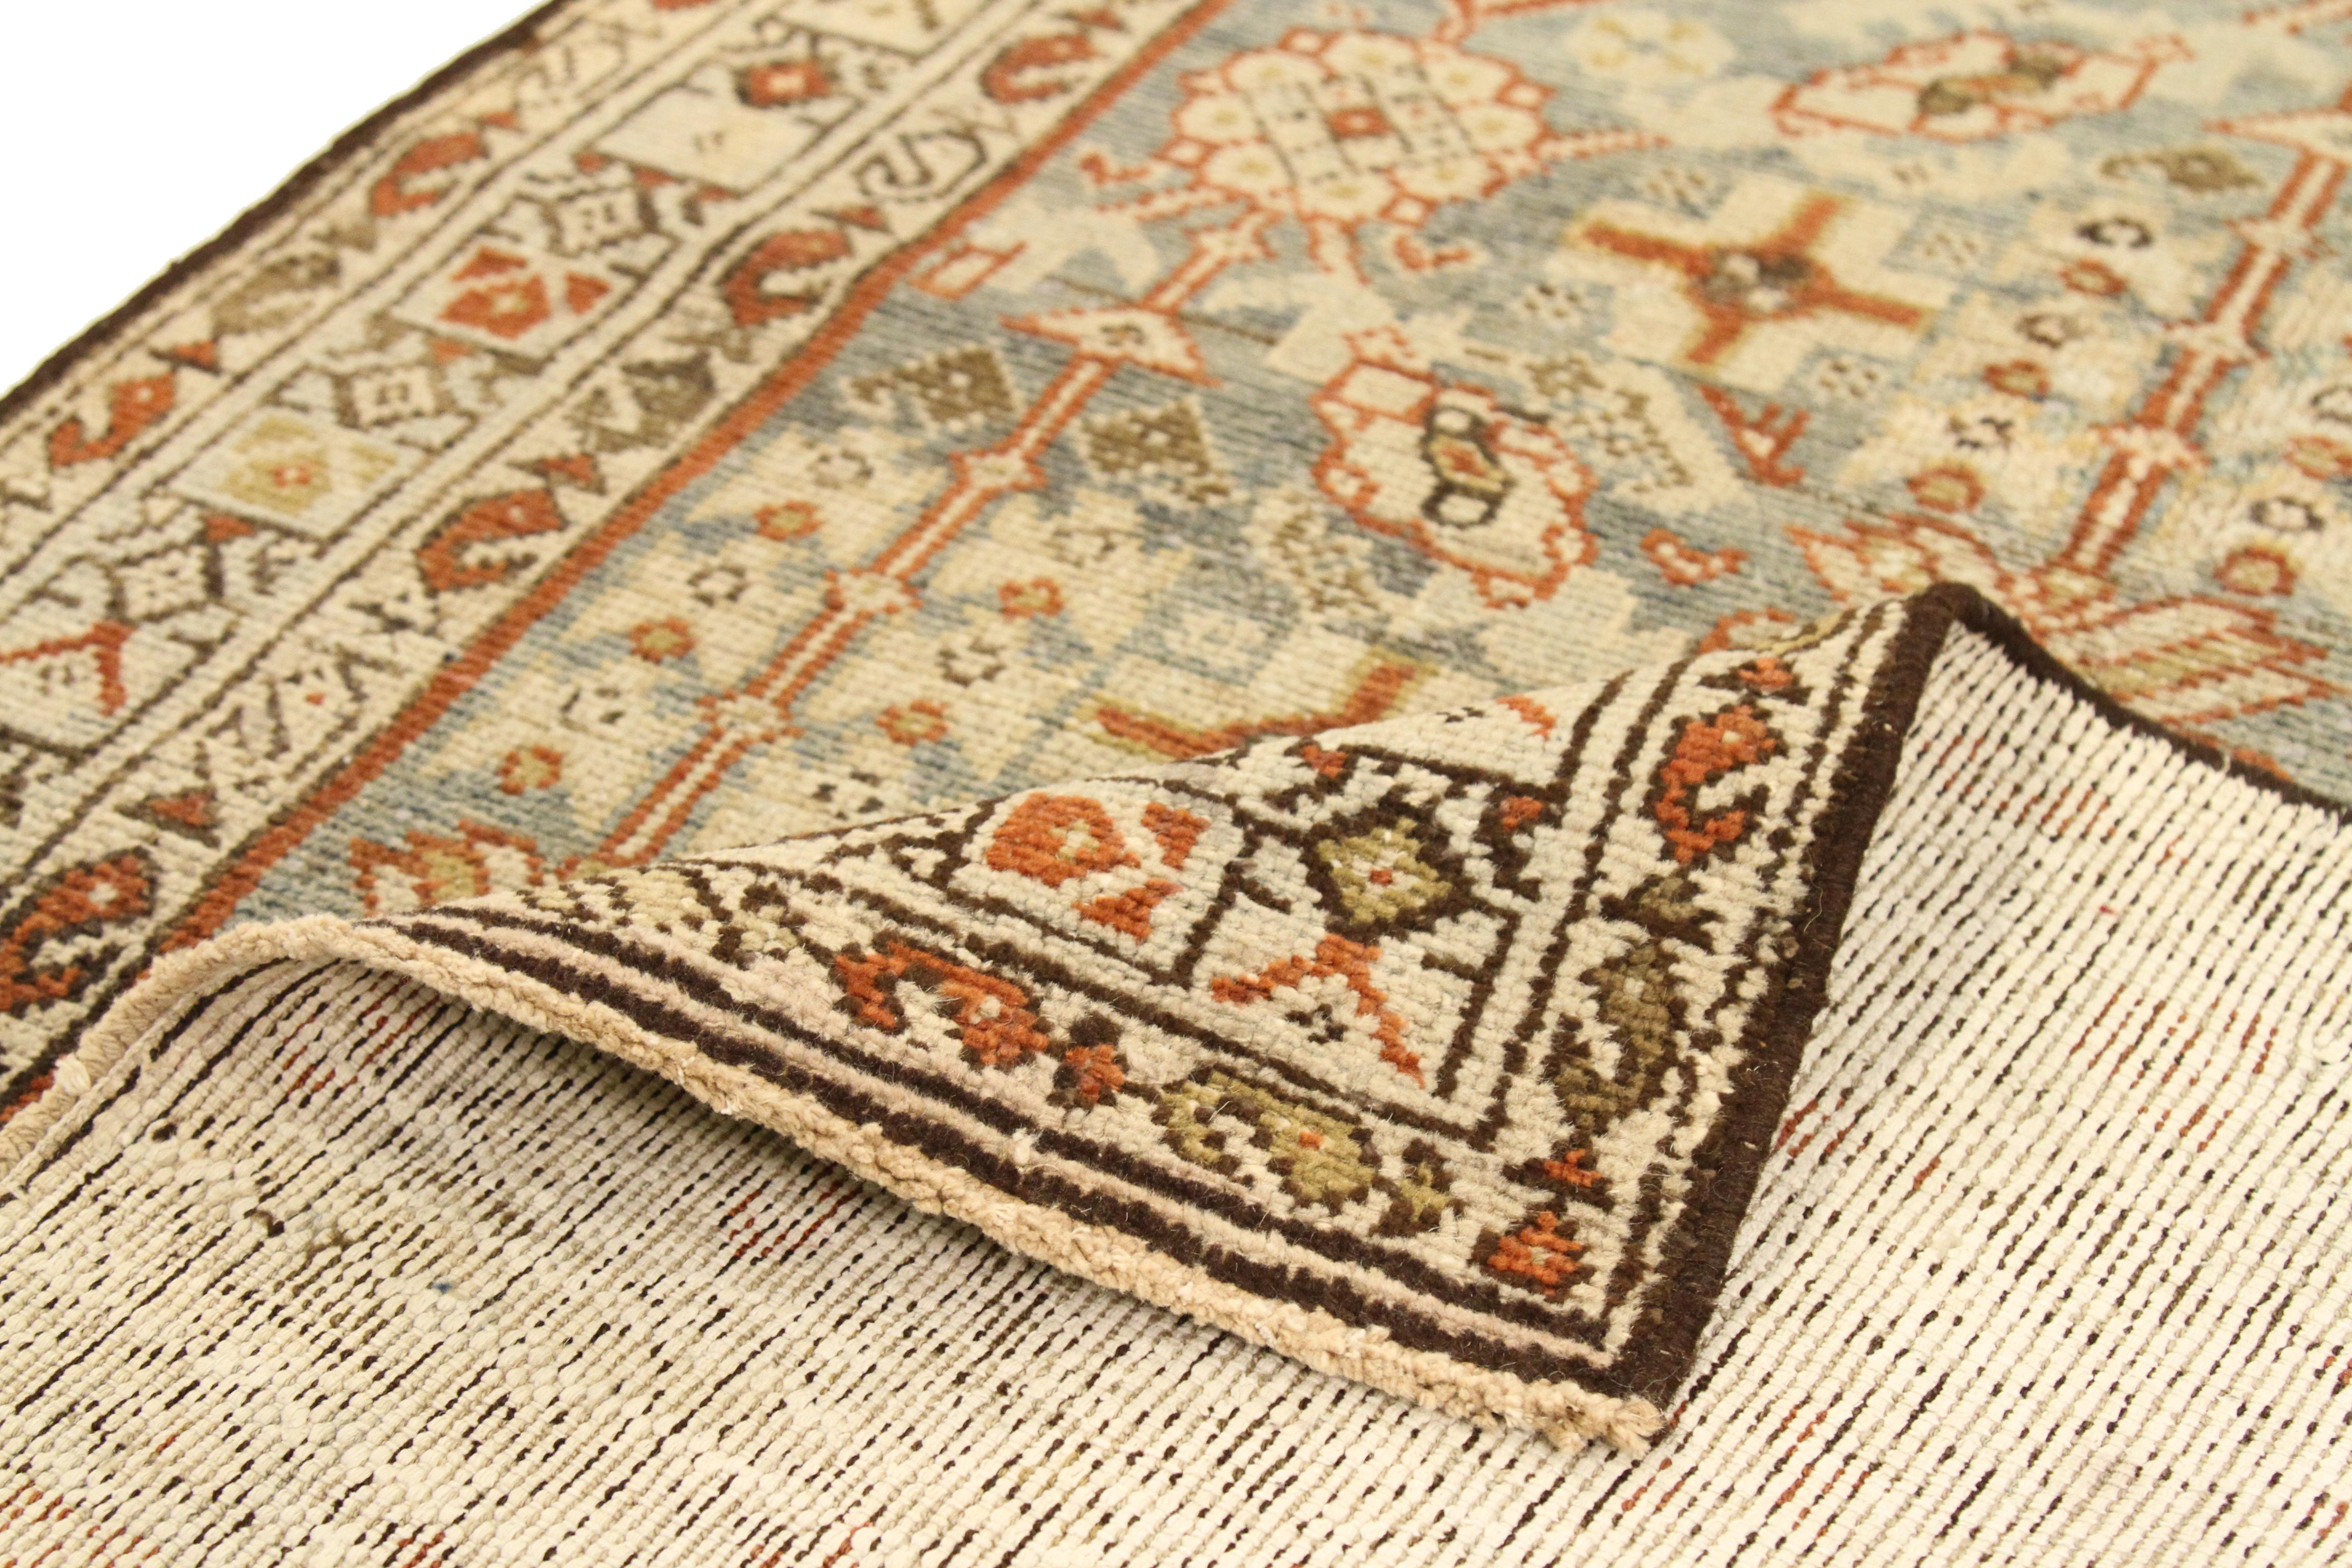 Antique Handwoven Persian Runner Rug Malayer Design In Excellent Condition For Sale In Dallas, TX